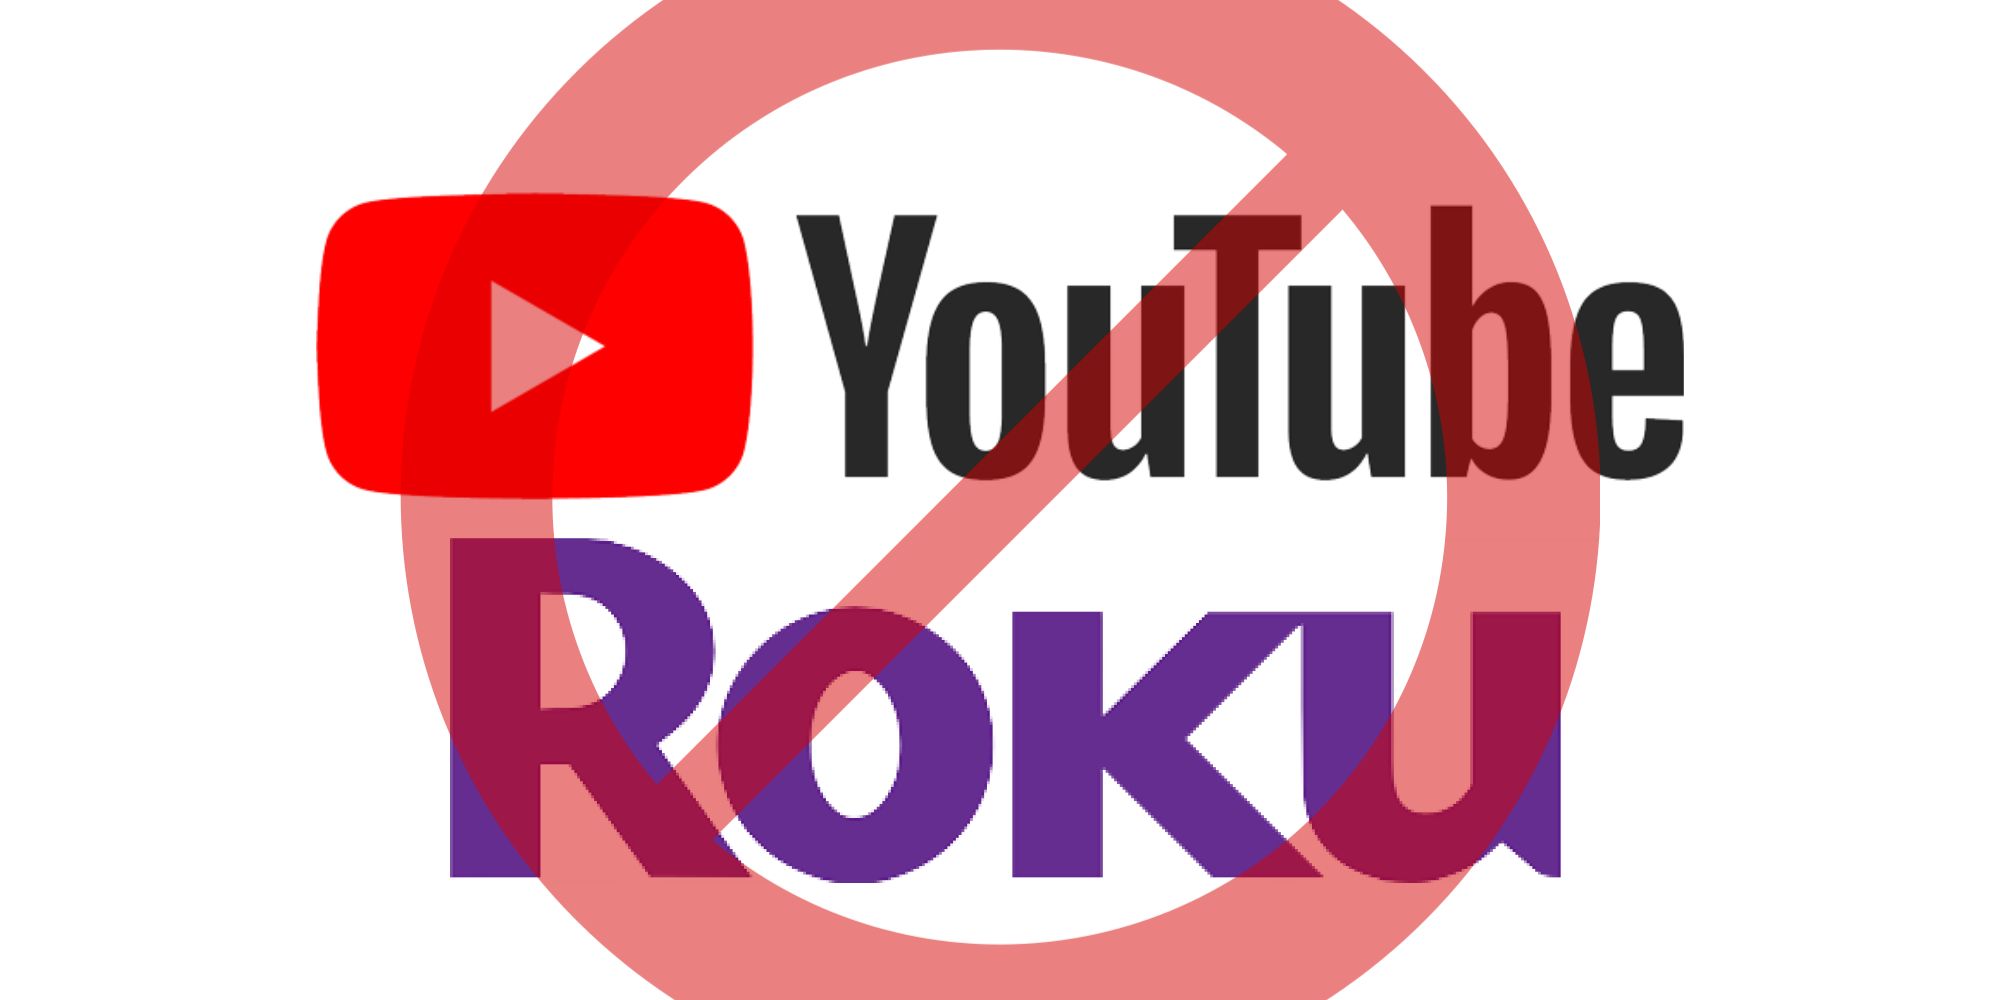 YouTube and Roku logos with 'no' icon on top of them